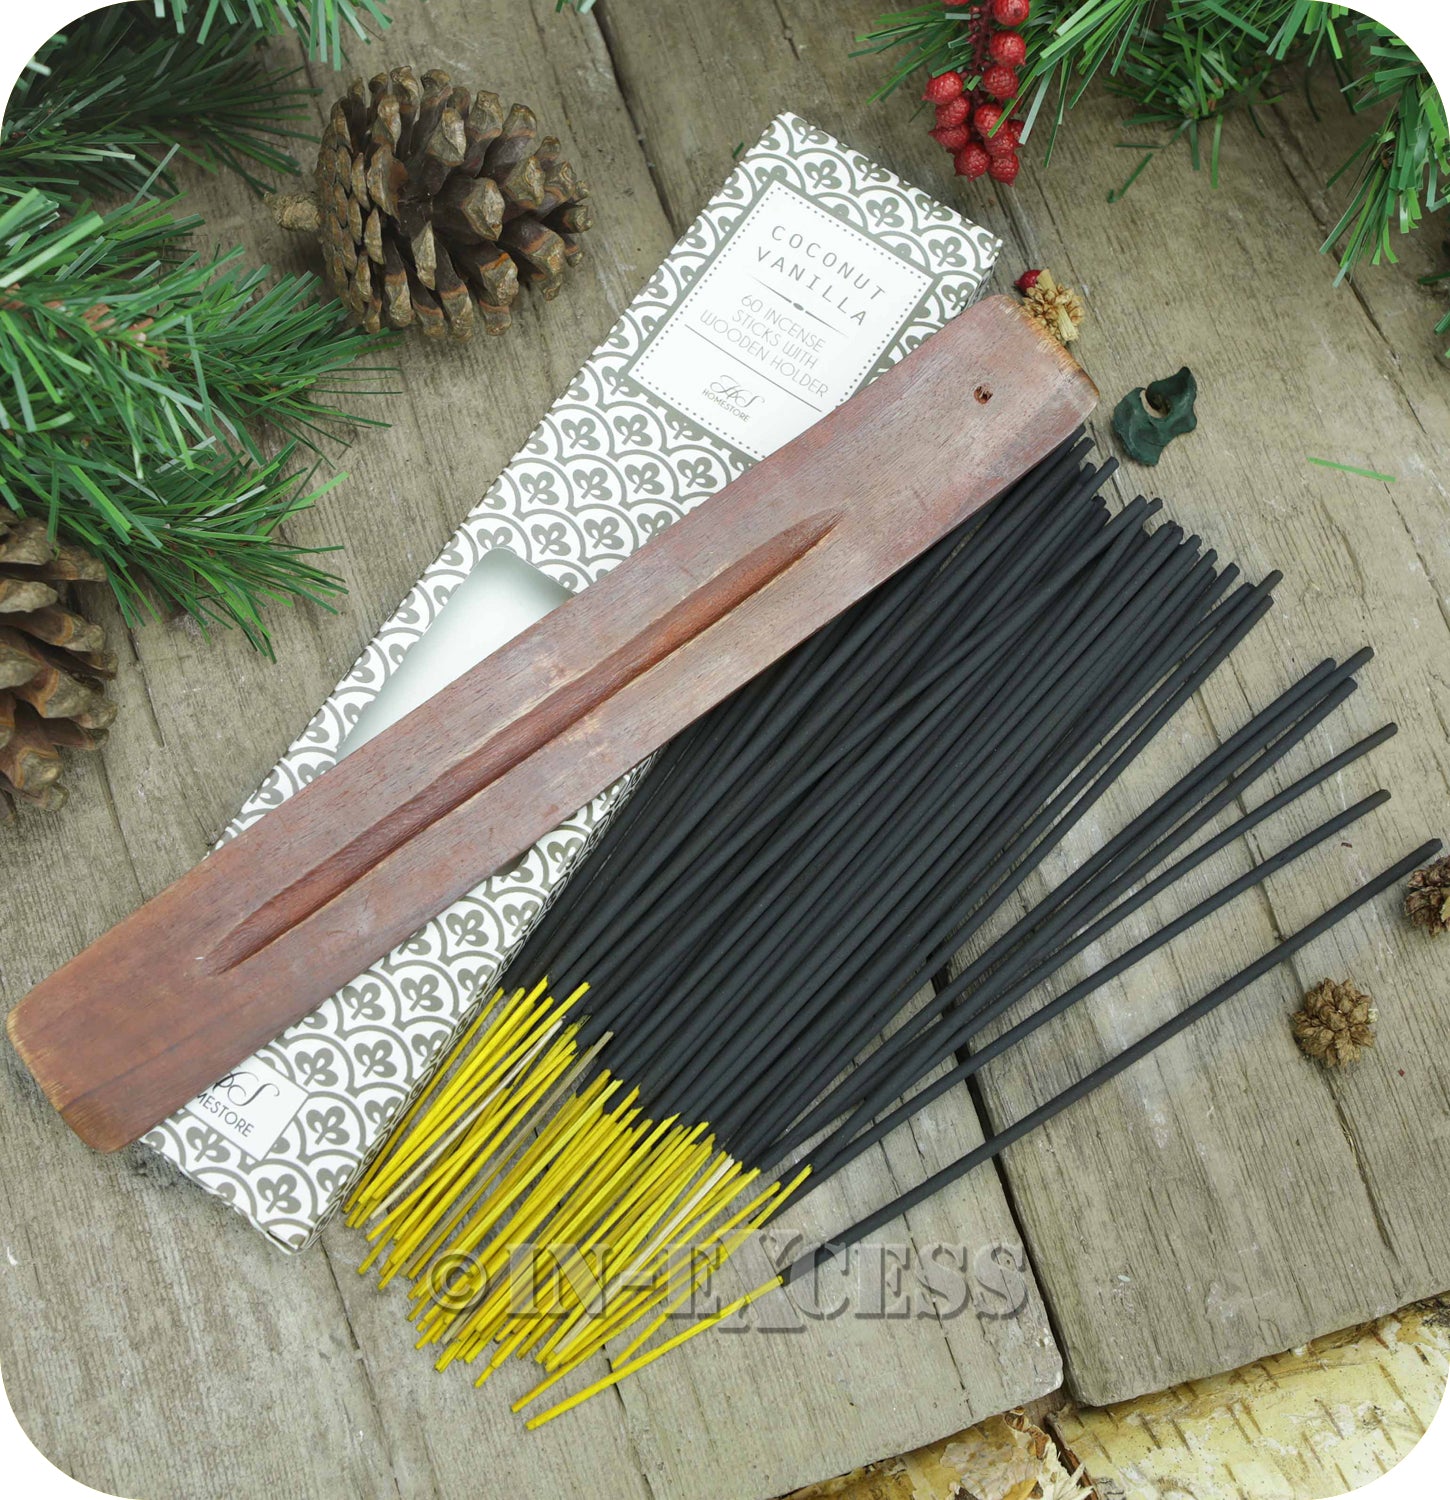 Fragranced Room Aroma Incense Sticks With Wooden Holder Coconut Vanilla - Pack of 60 Pieces